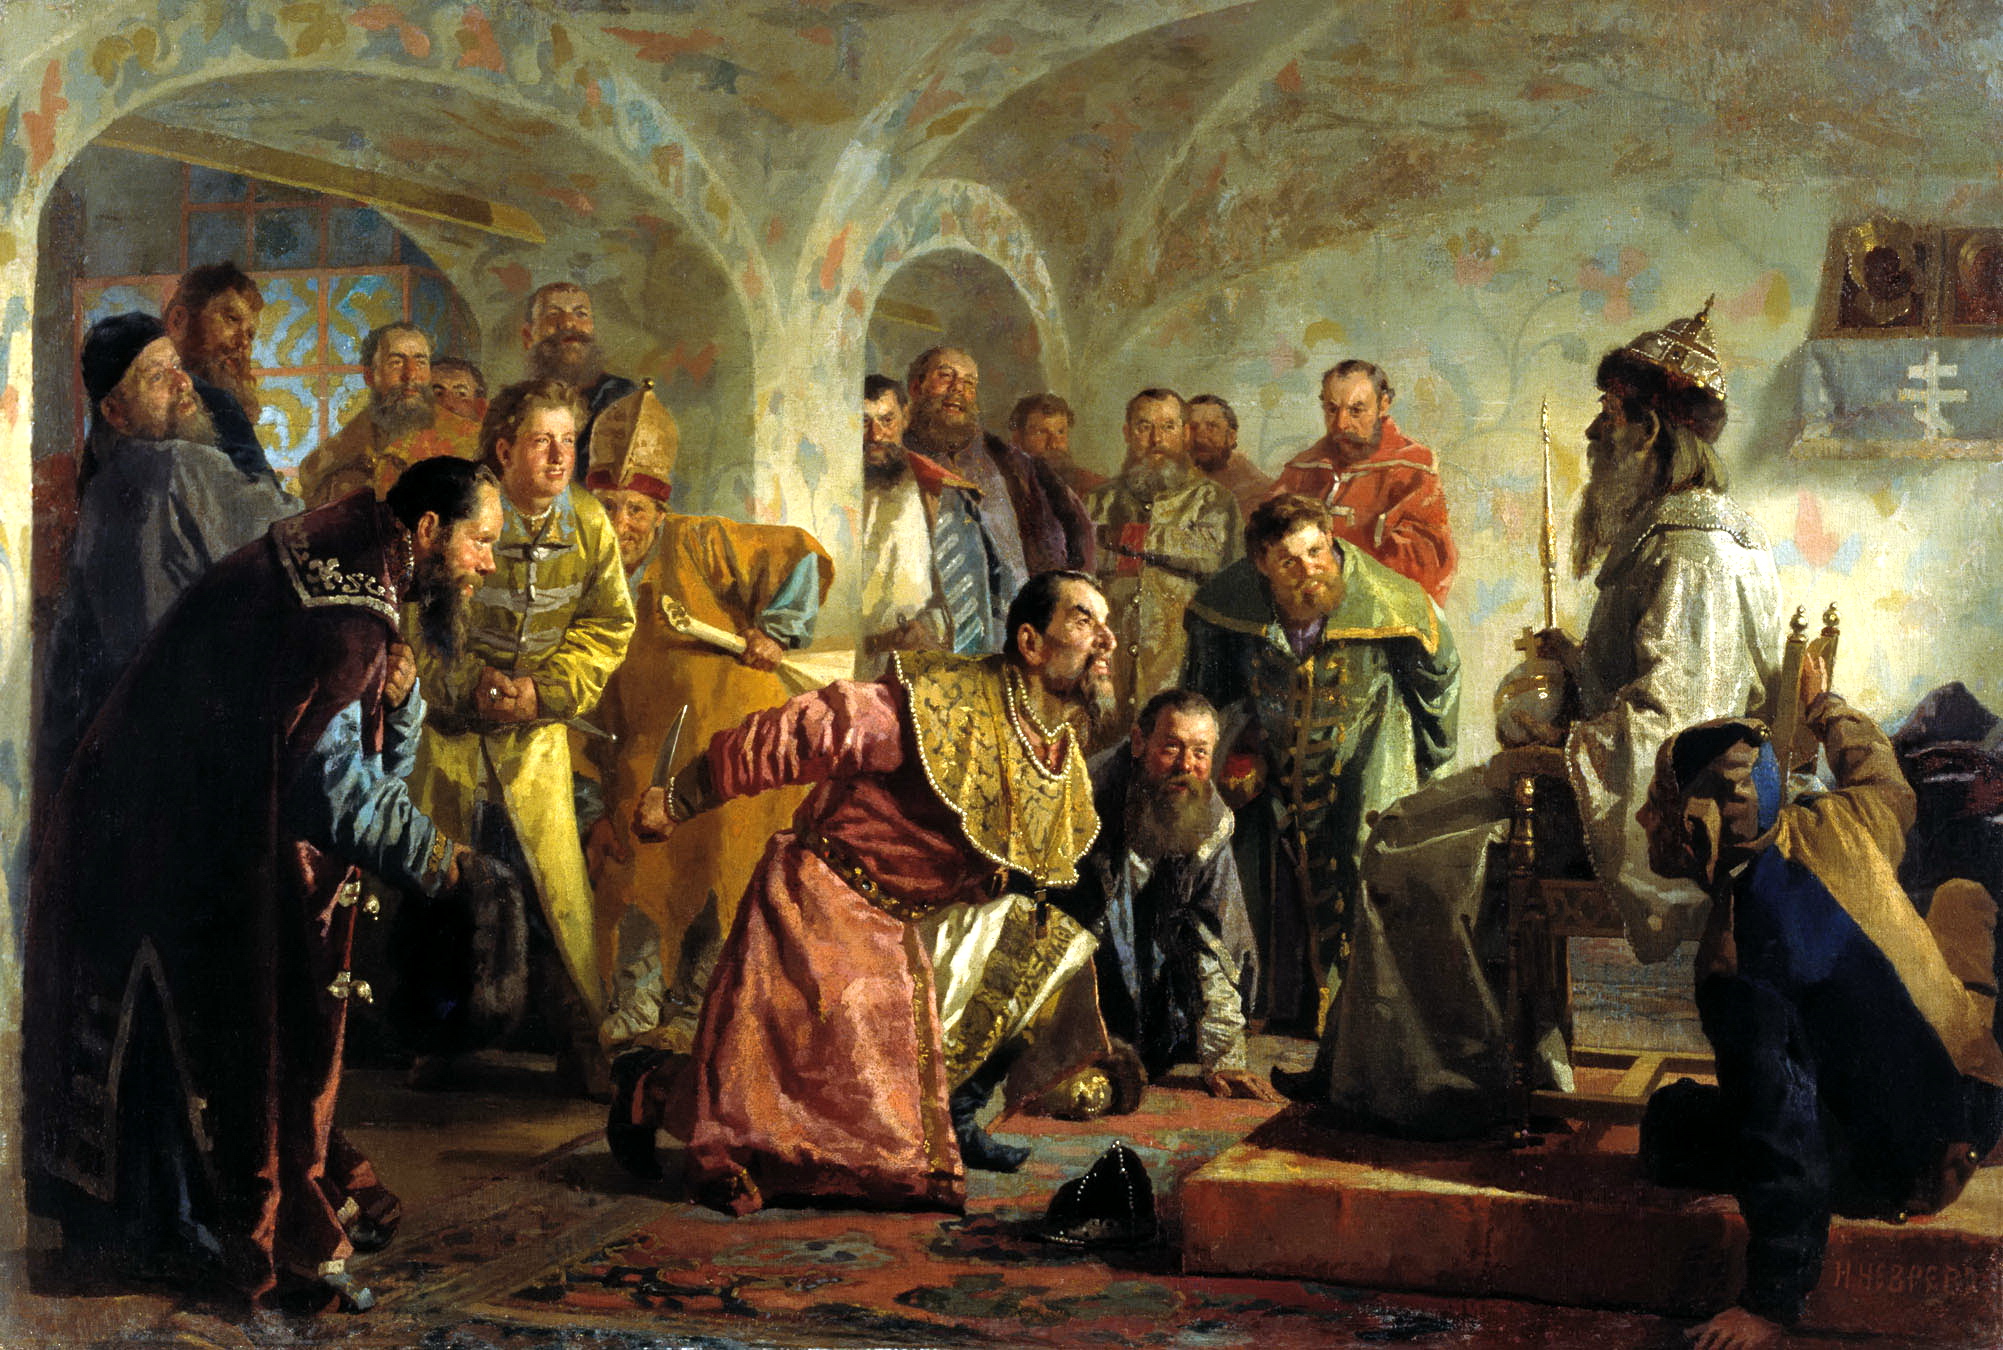 Ivan the Terrible used the Oprichnina to take over Russia.